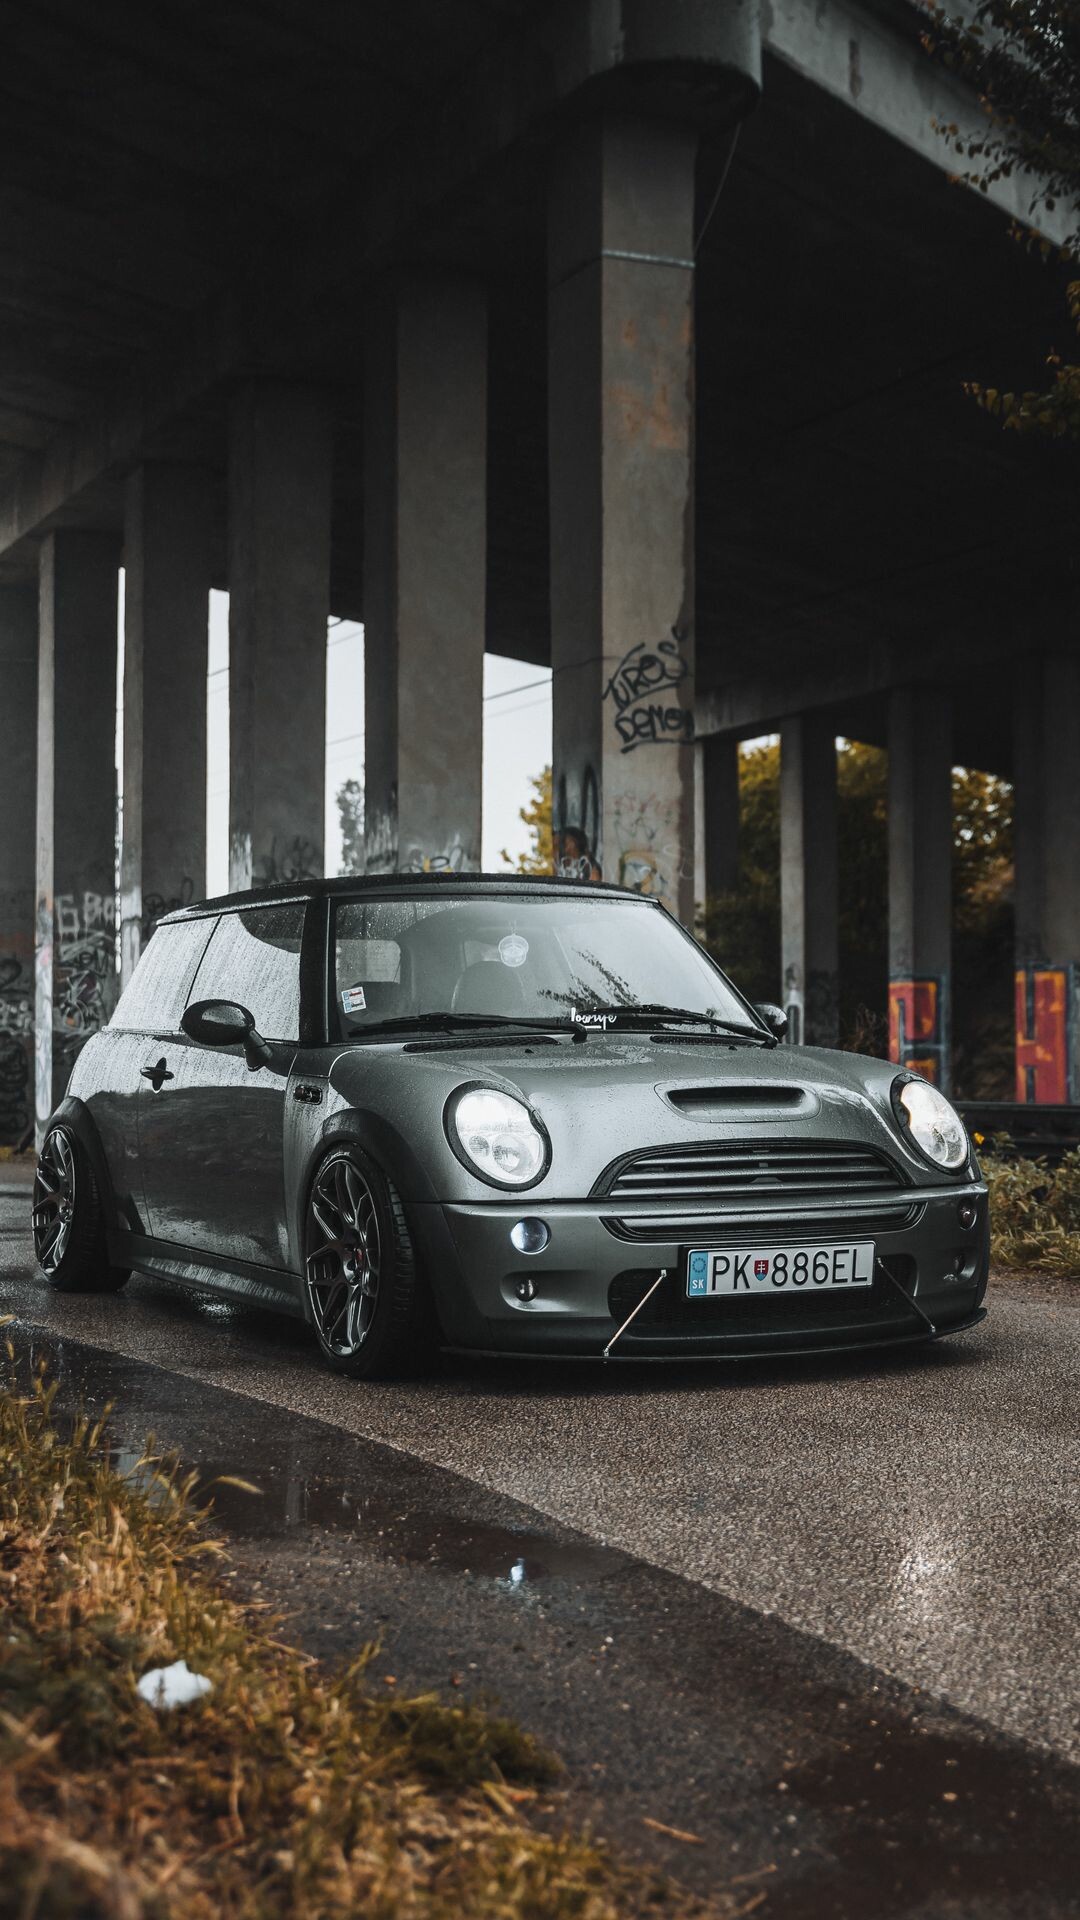 MINI Cooper: A British automotive marque founded in 1969. 1080x1920 Full HD Wallpaper.